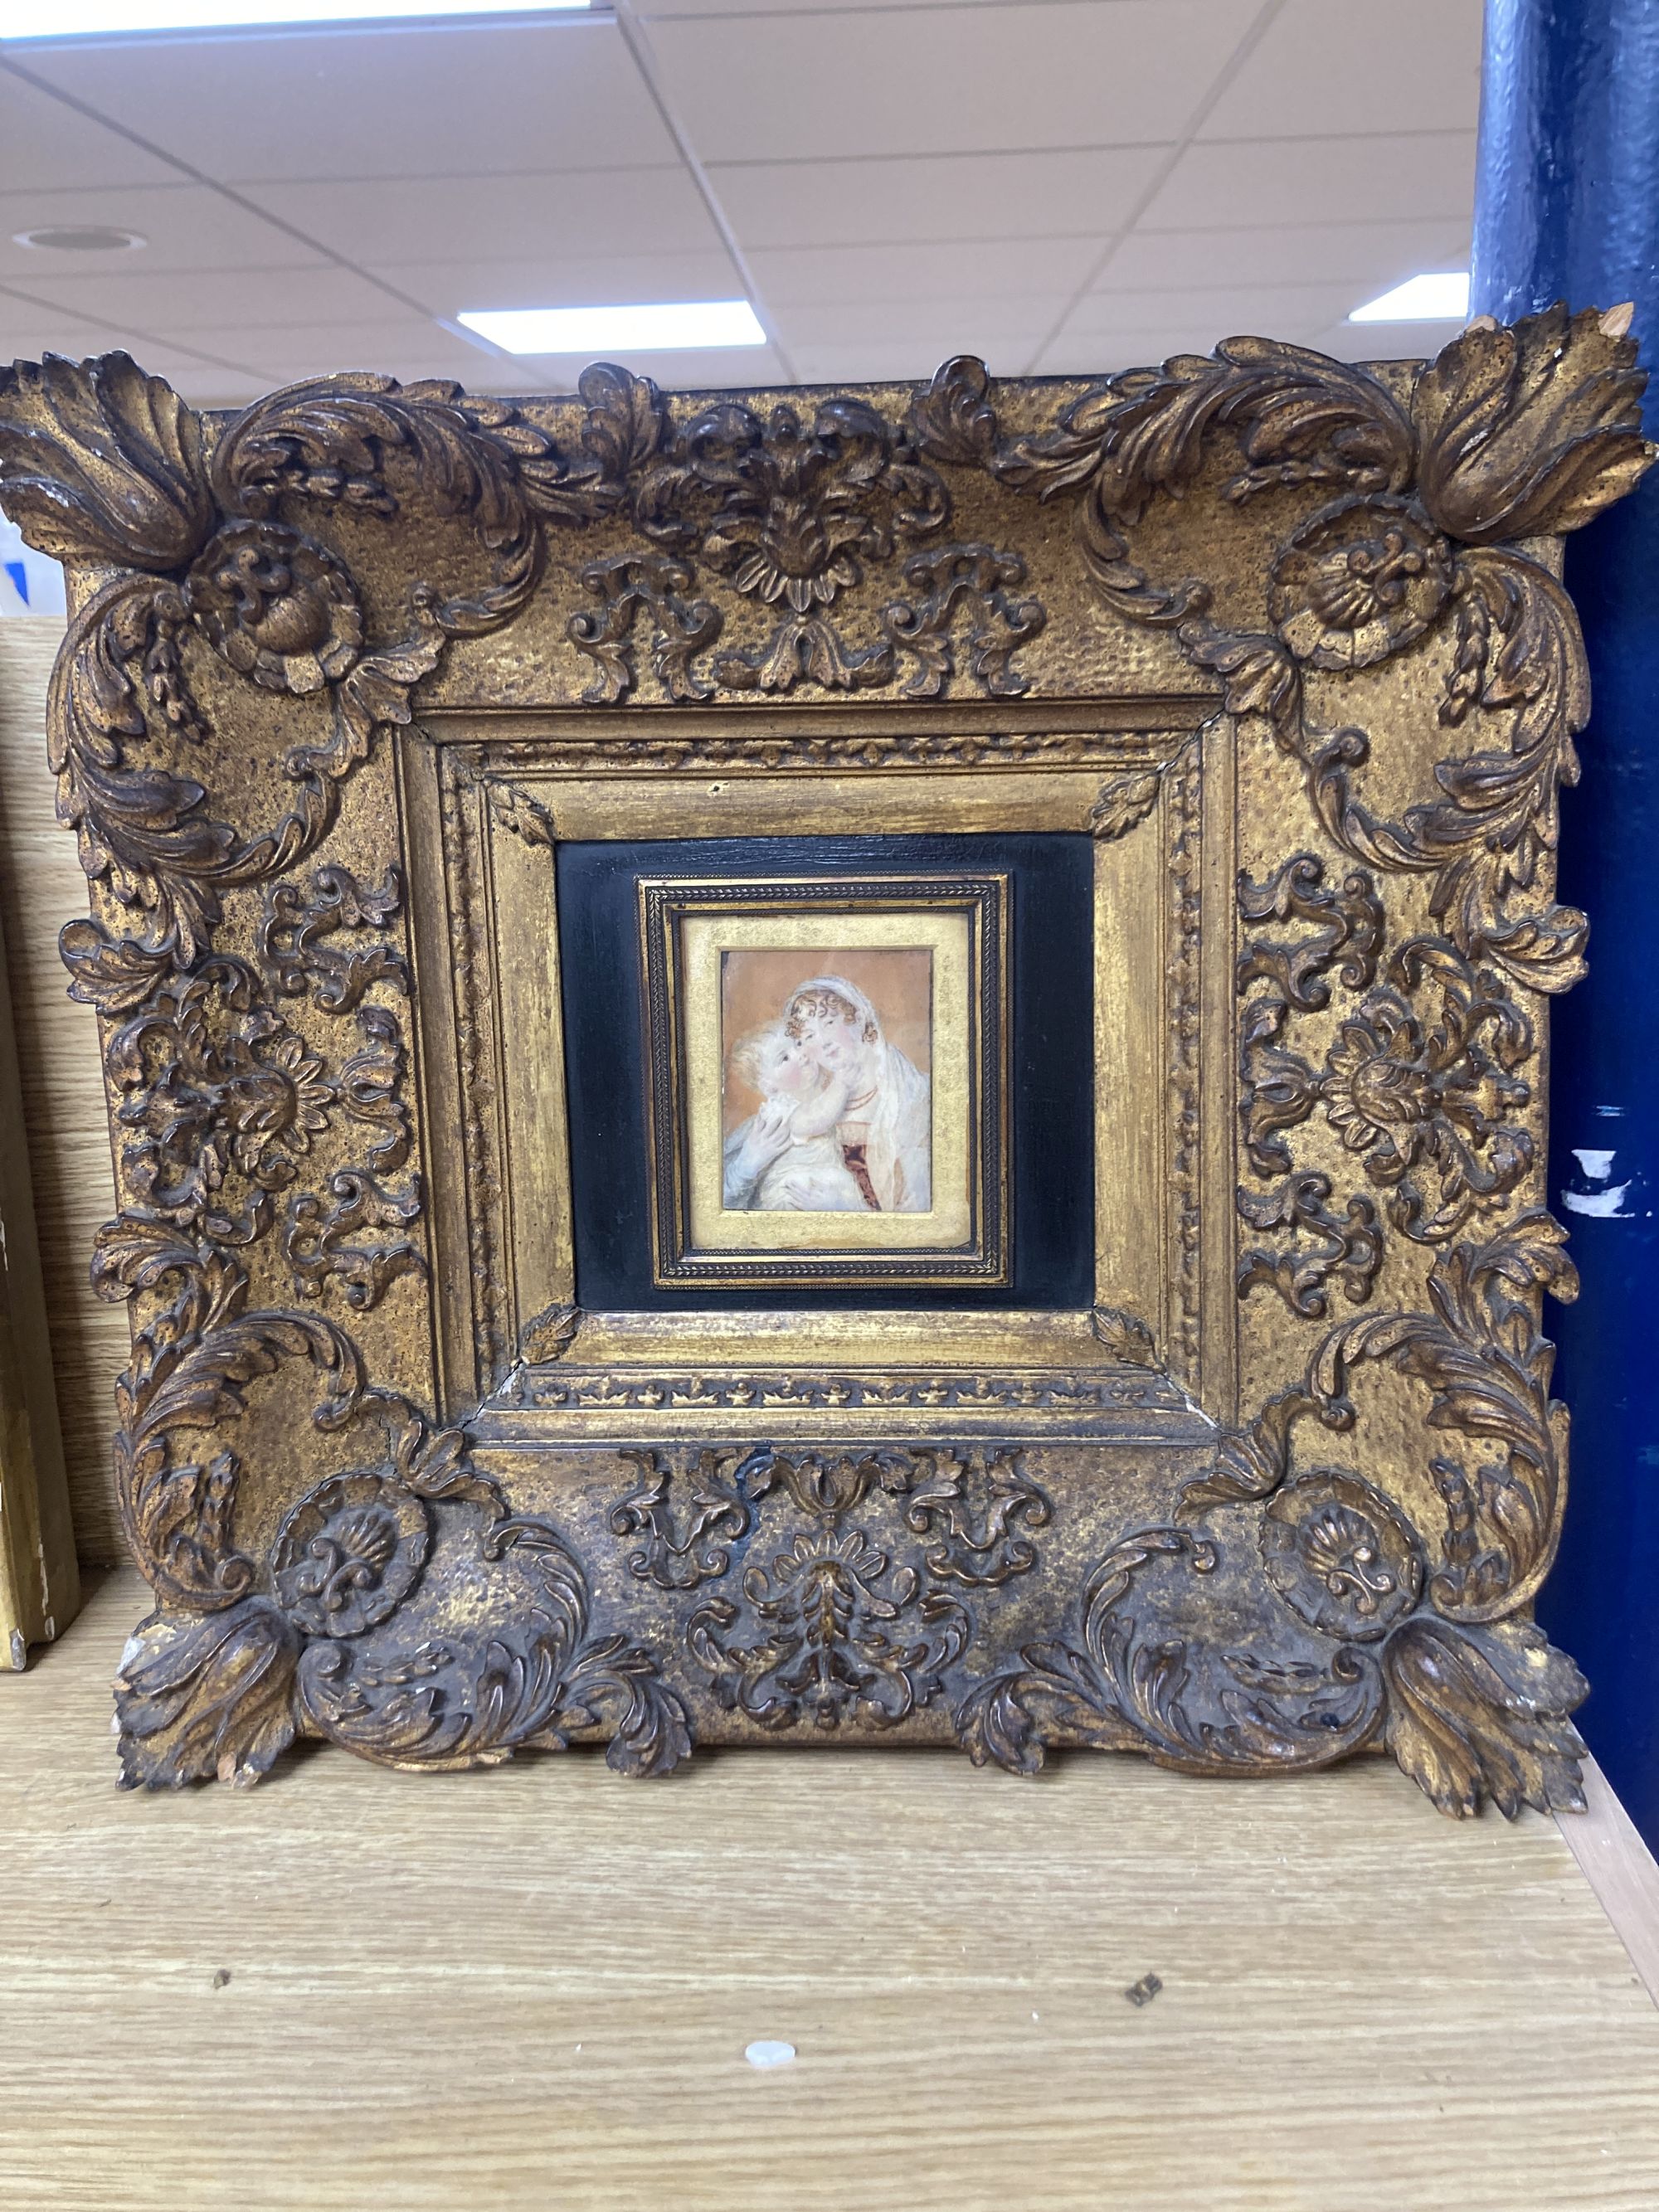 19th century English School, oil on ivory, Miniature portrait of a mother and child, 8.5 x 6.5cm, housed in an ornate gilt gesso frame,